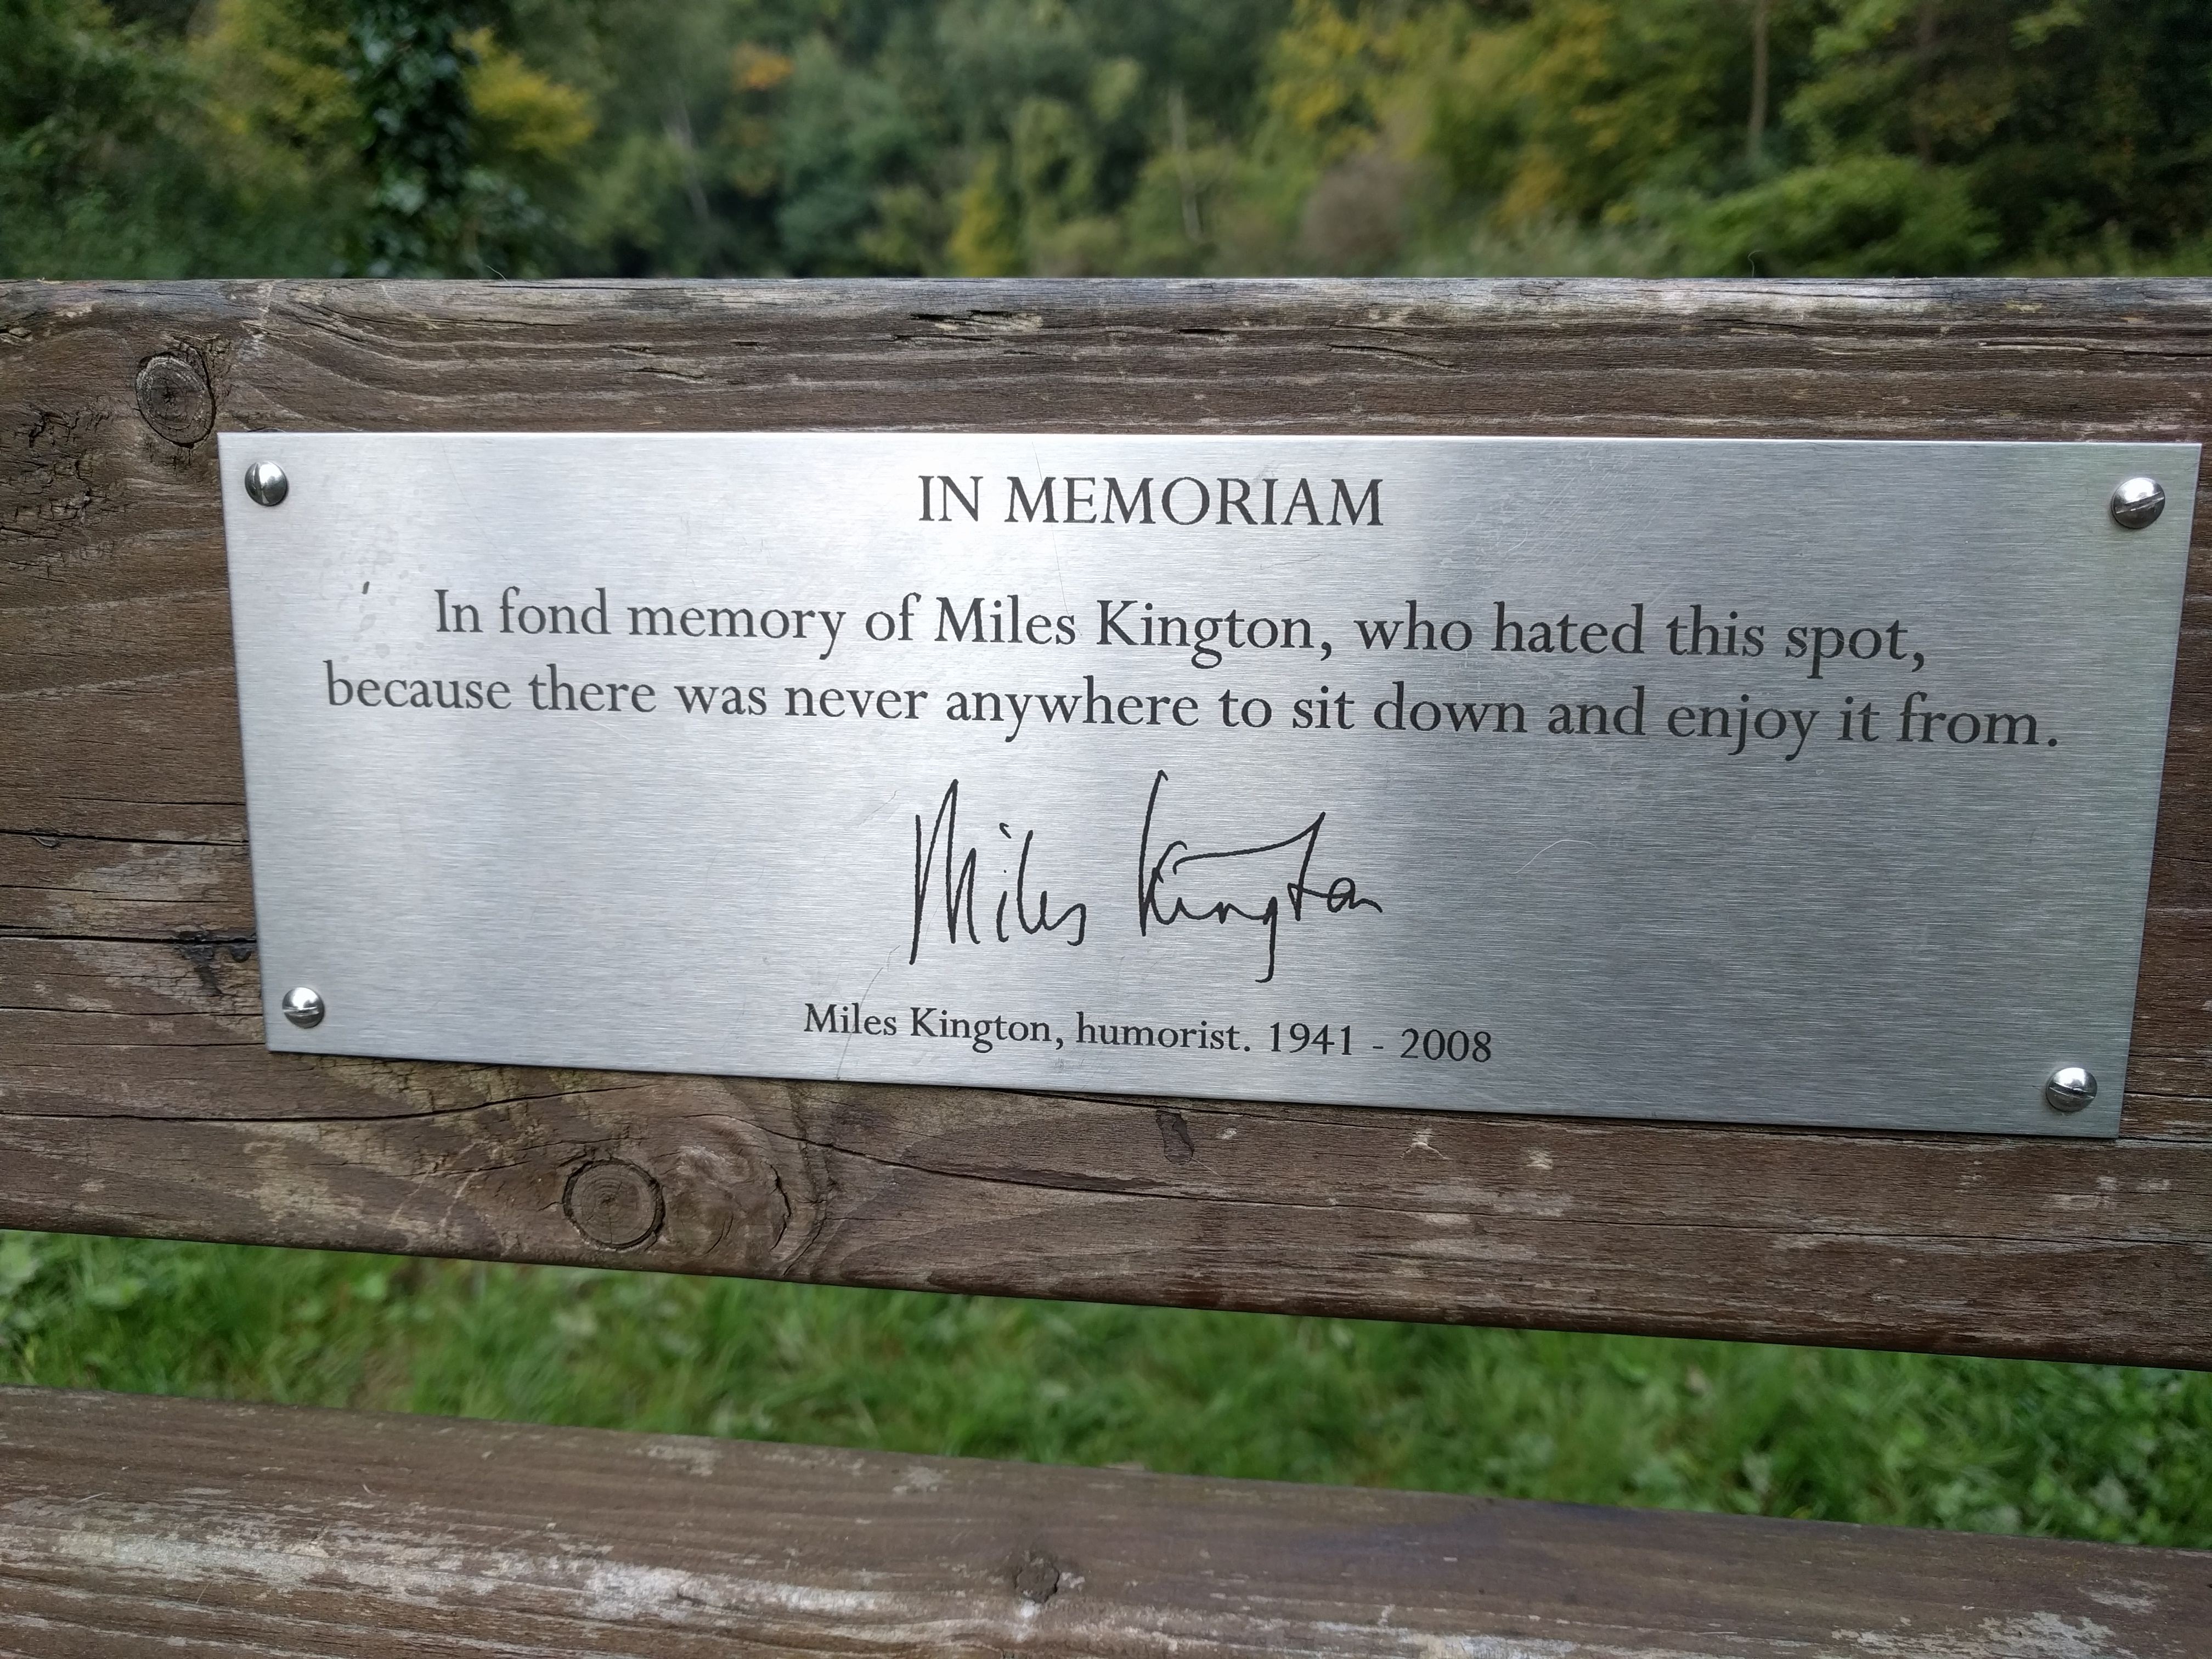 In Memoriam In fond memory of Miles Kington, who hated this spot, because there was never anywhere to sit down and enjoy it from. Miles Kington, humorist. 1941-2008